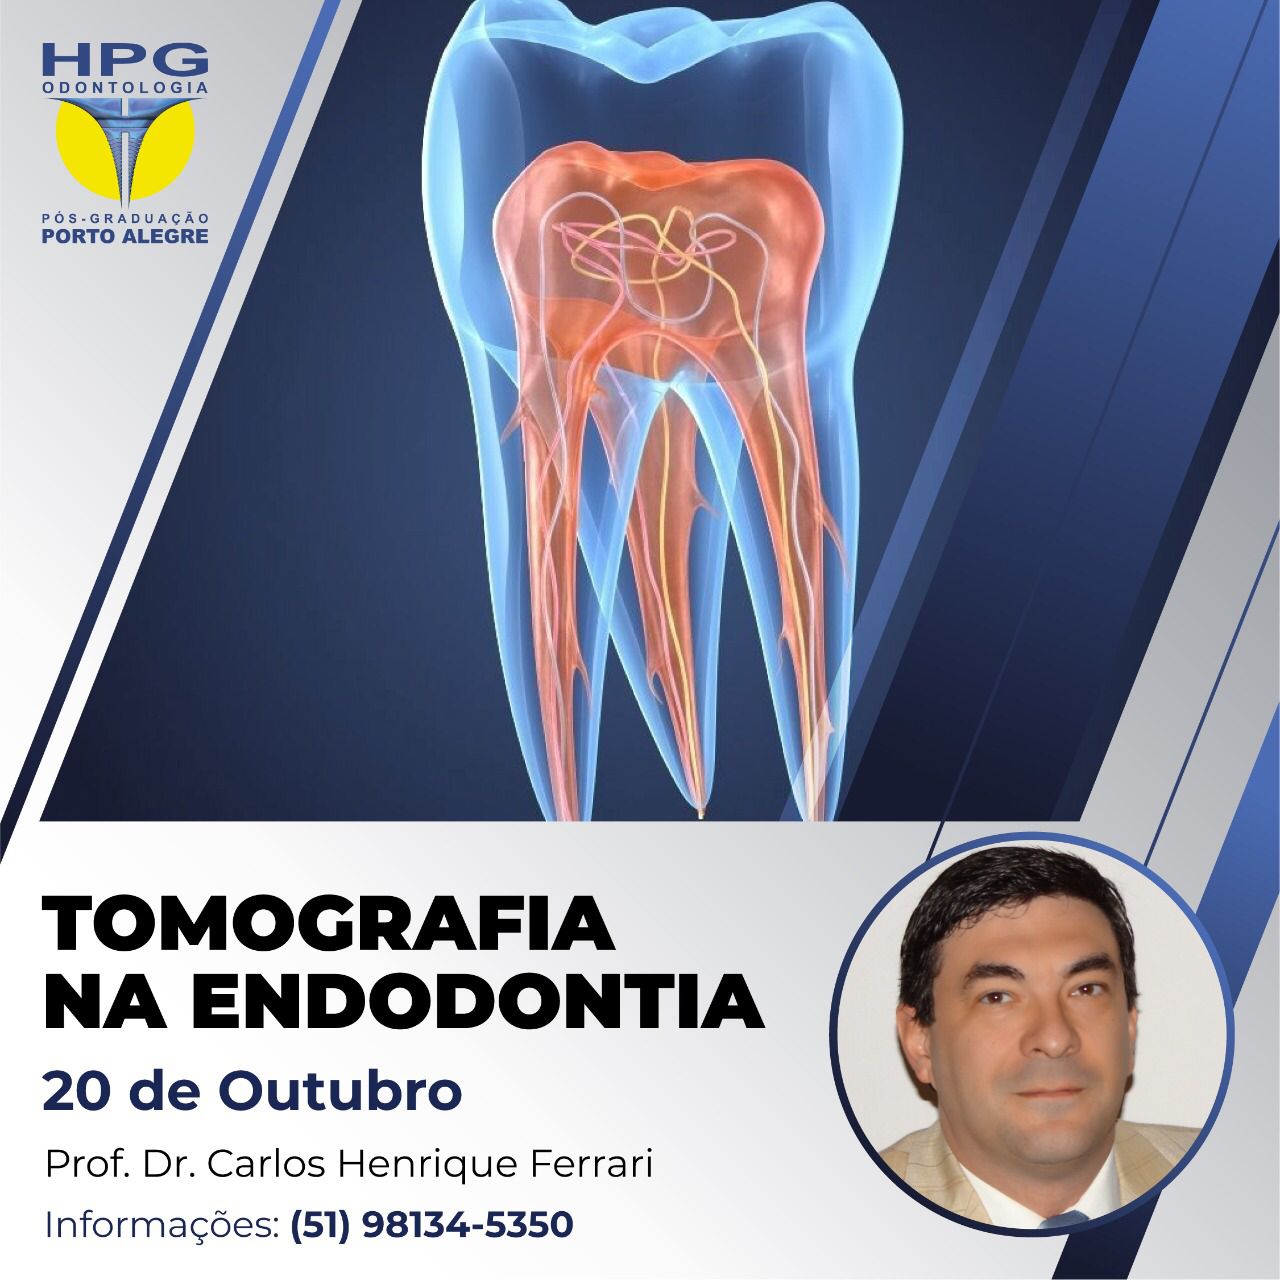 You are currently viewing Cone Beam Tomography in Endodontics in Porto Alegre.